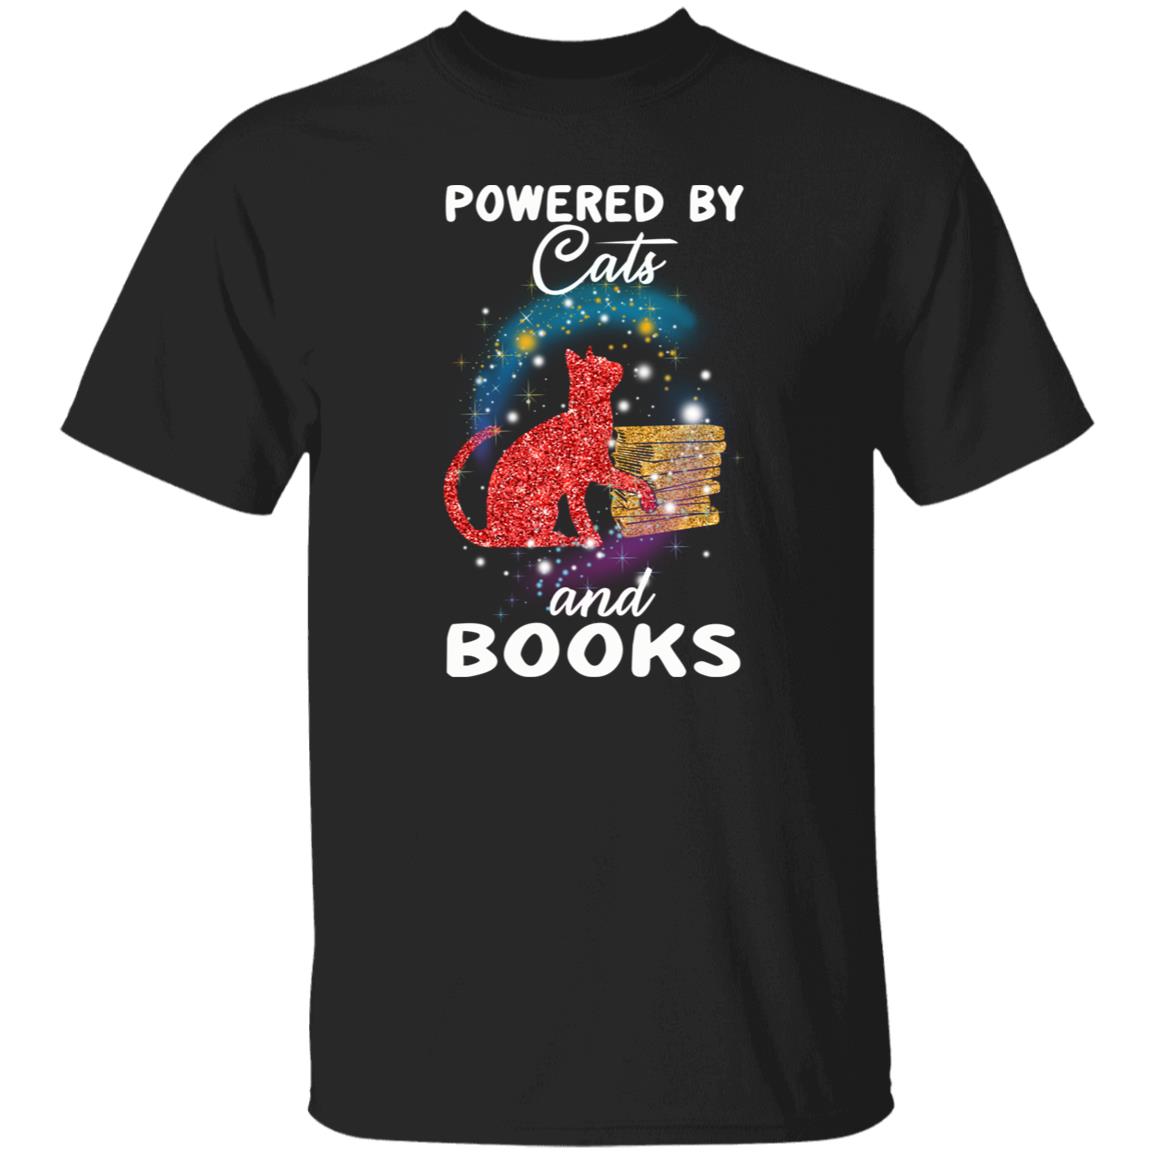 Powered by cats and books Unisex shirt Black Dark Heather-Family-Gift-Planet